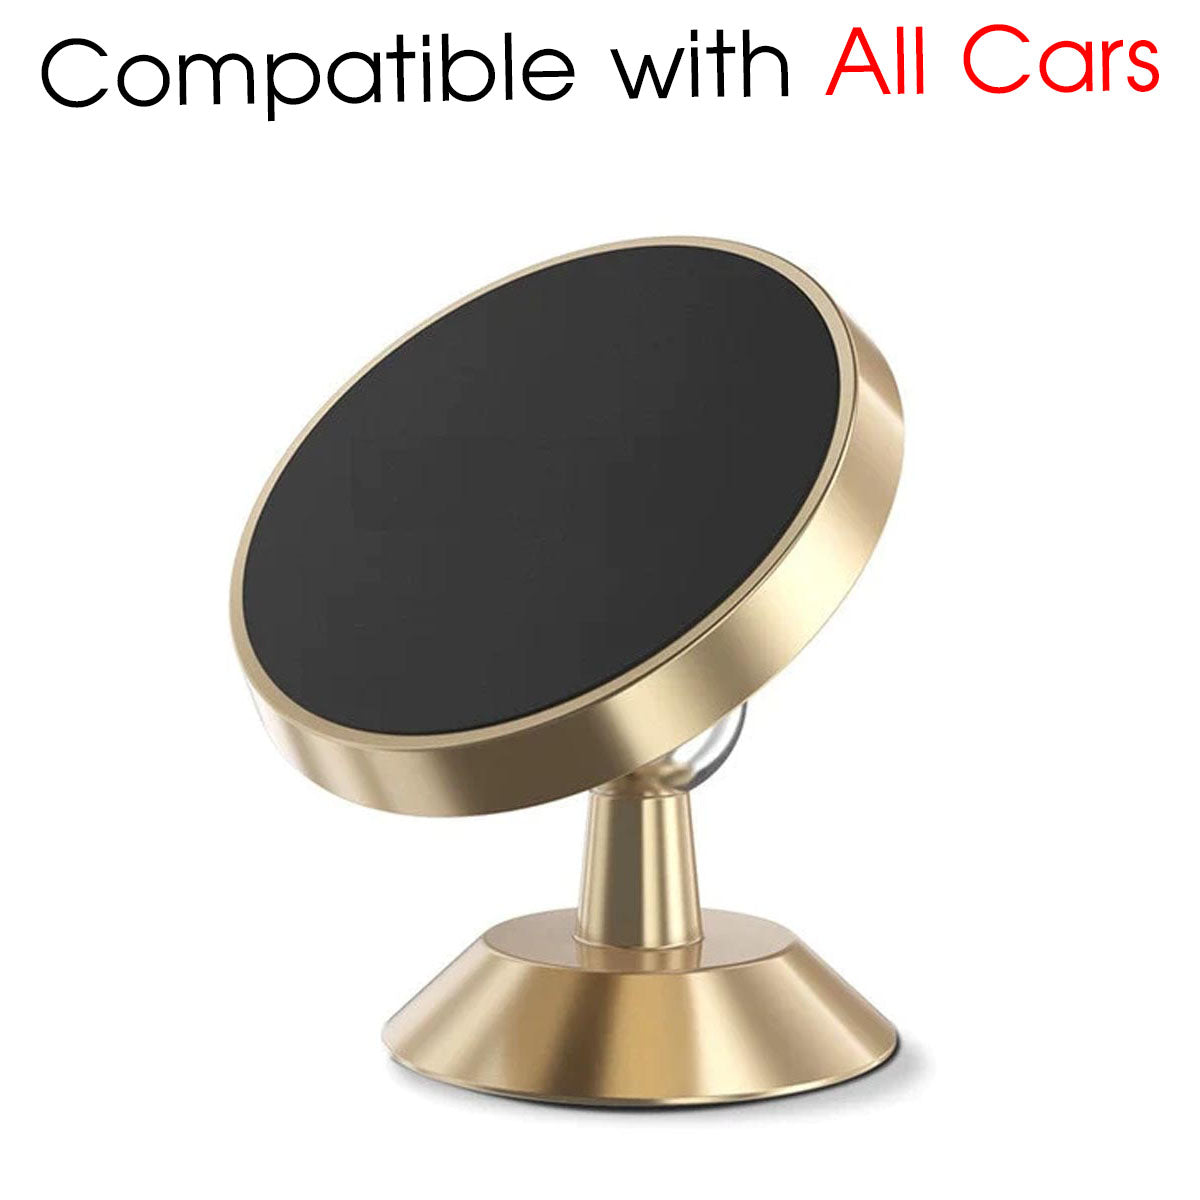 [2 Pack ] Magnetic Phone Mount, Custom For Your Cars, [ Super Strong Magnet ] [ with 4 Metal Plate ] car Magnetic Phone Holder, [ 360° Rotation ] Universal Dashboard car Mount Fits All Cell Phones, Car Accessories TS13982